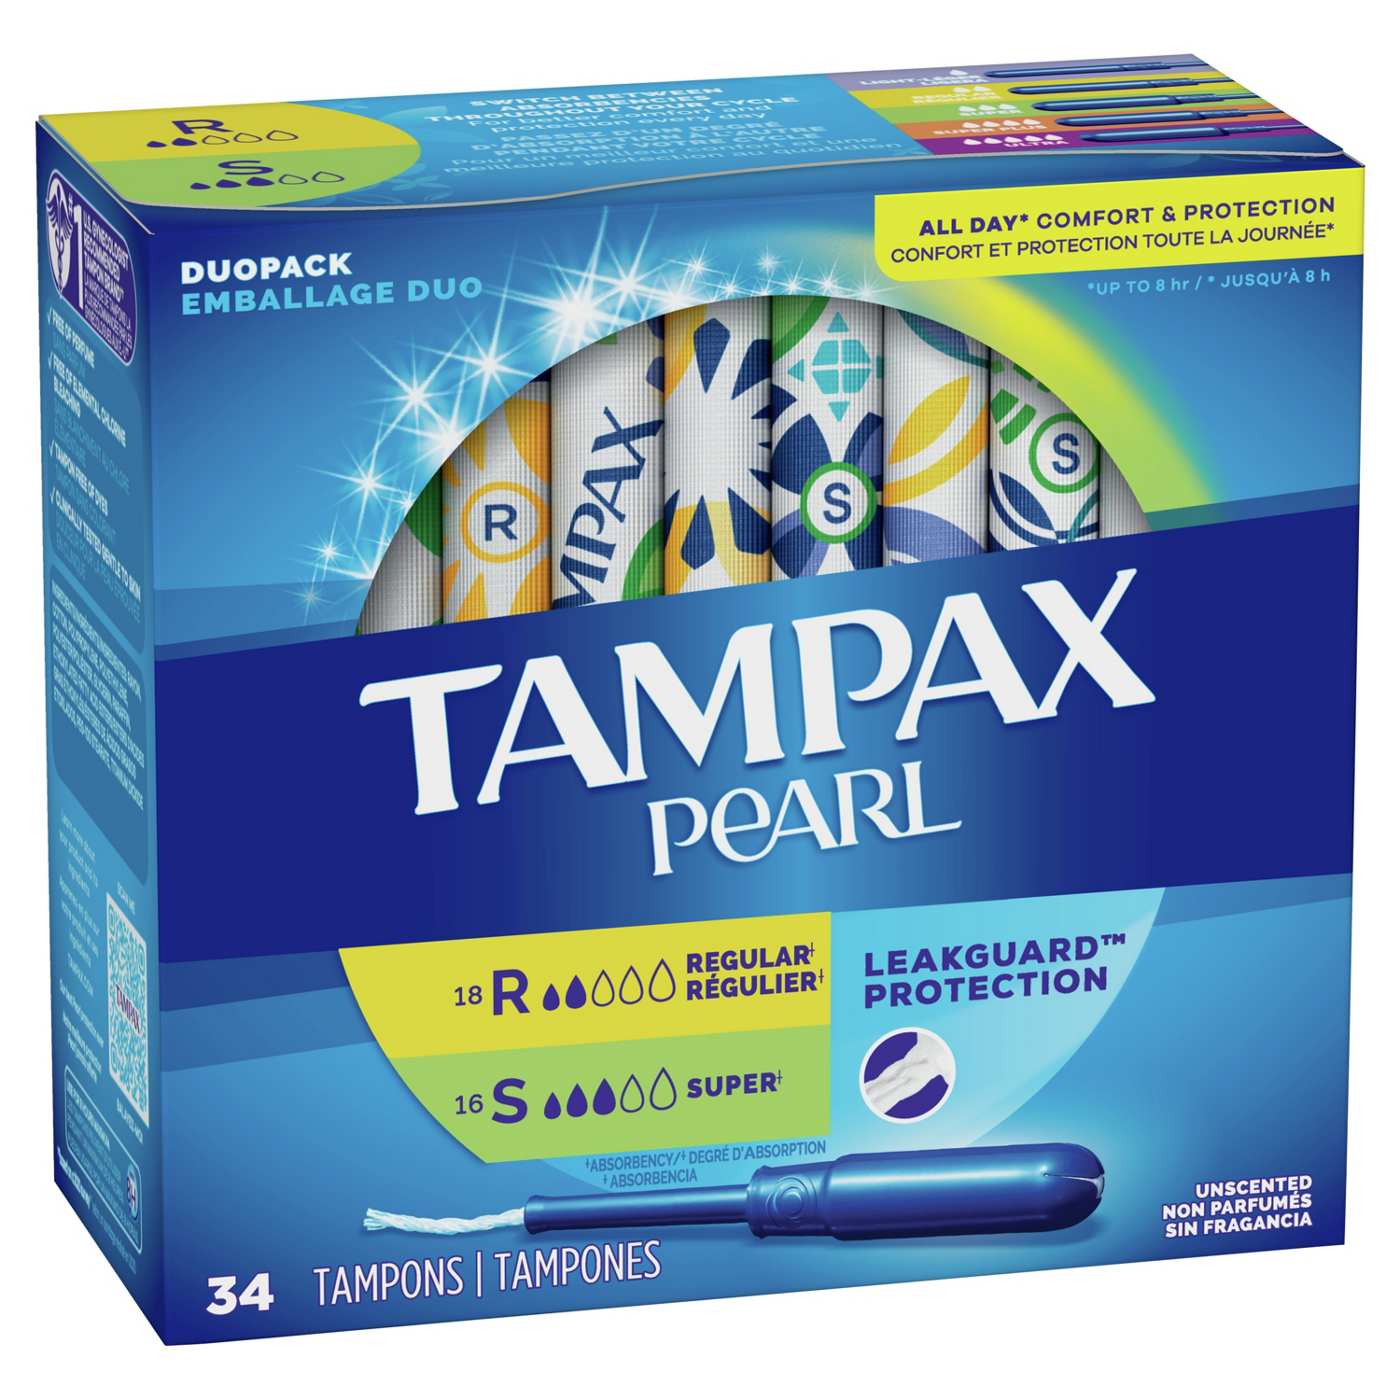 Tampax Pearl Tampons Duo Pack, Regular/Super Unscented; image 3 of 4